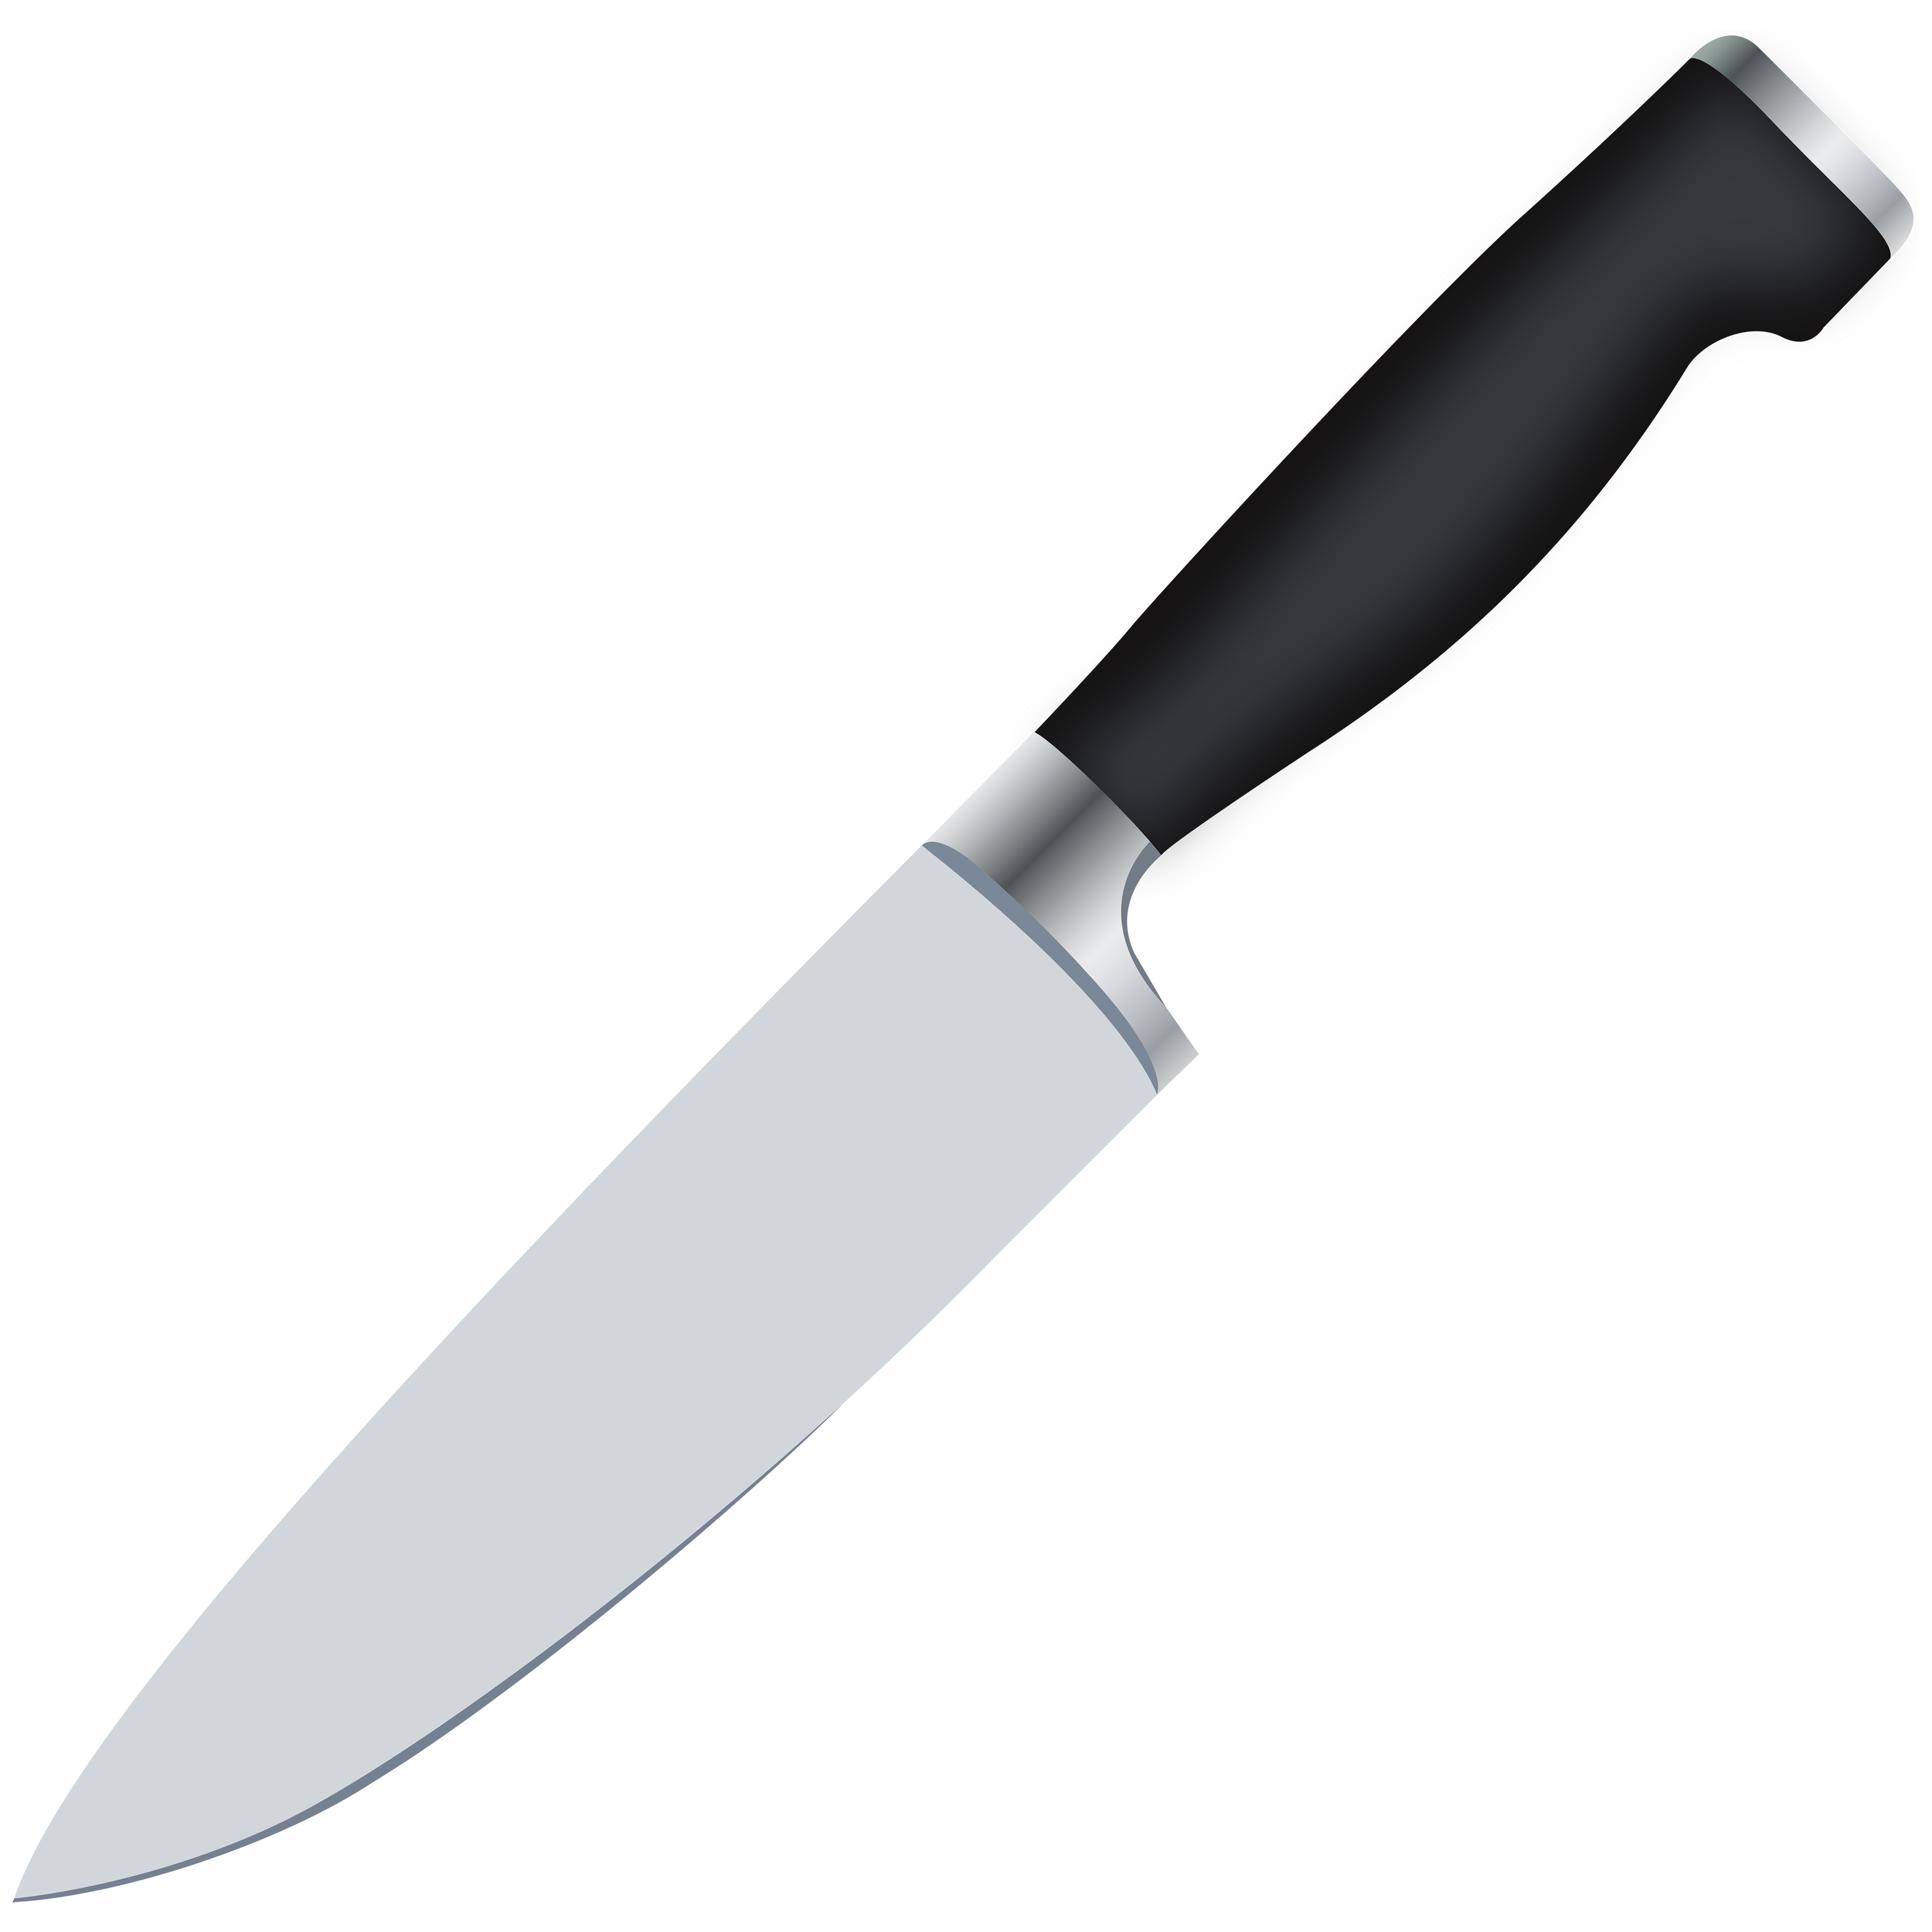 Knife Transparent Picture